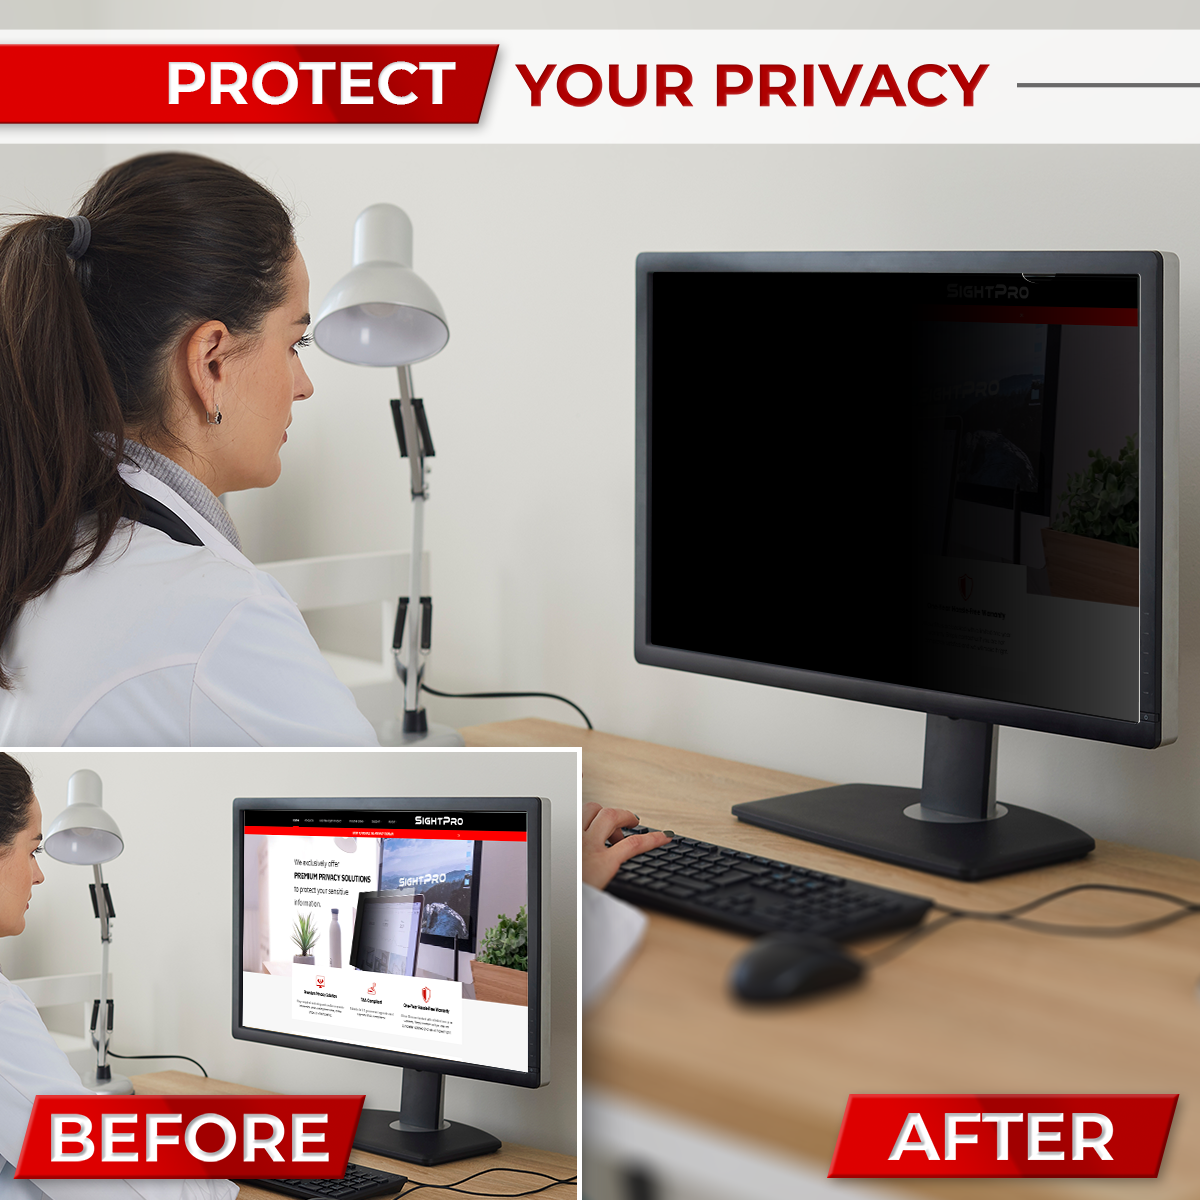 SightPro 20 Inch 16:9 Privacy Screen Filter for Computer Monitors